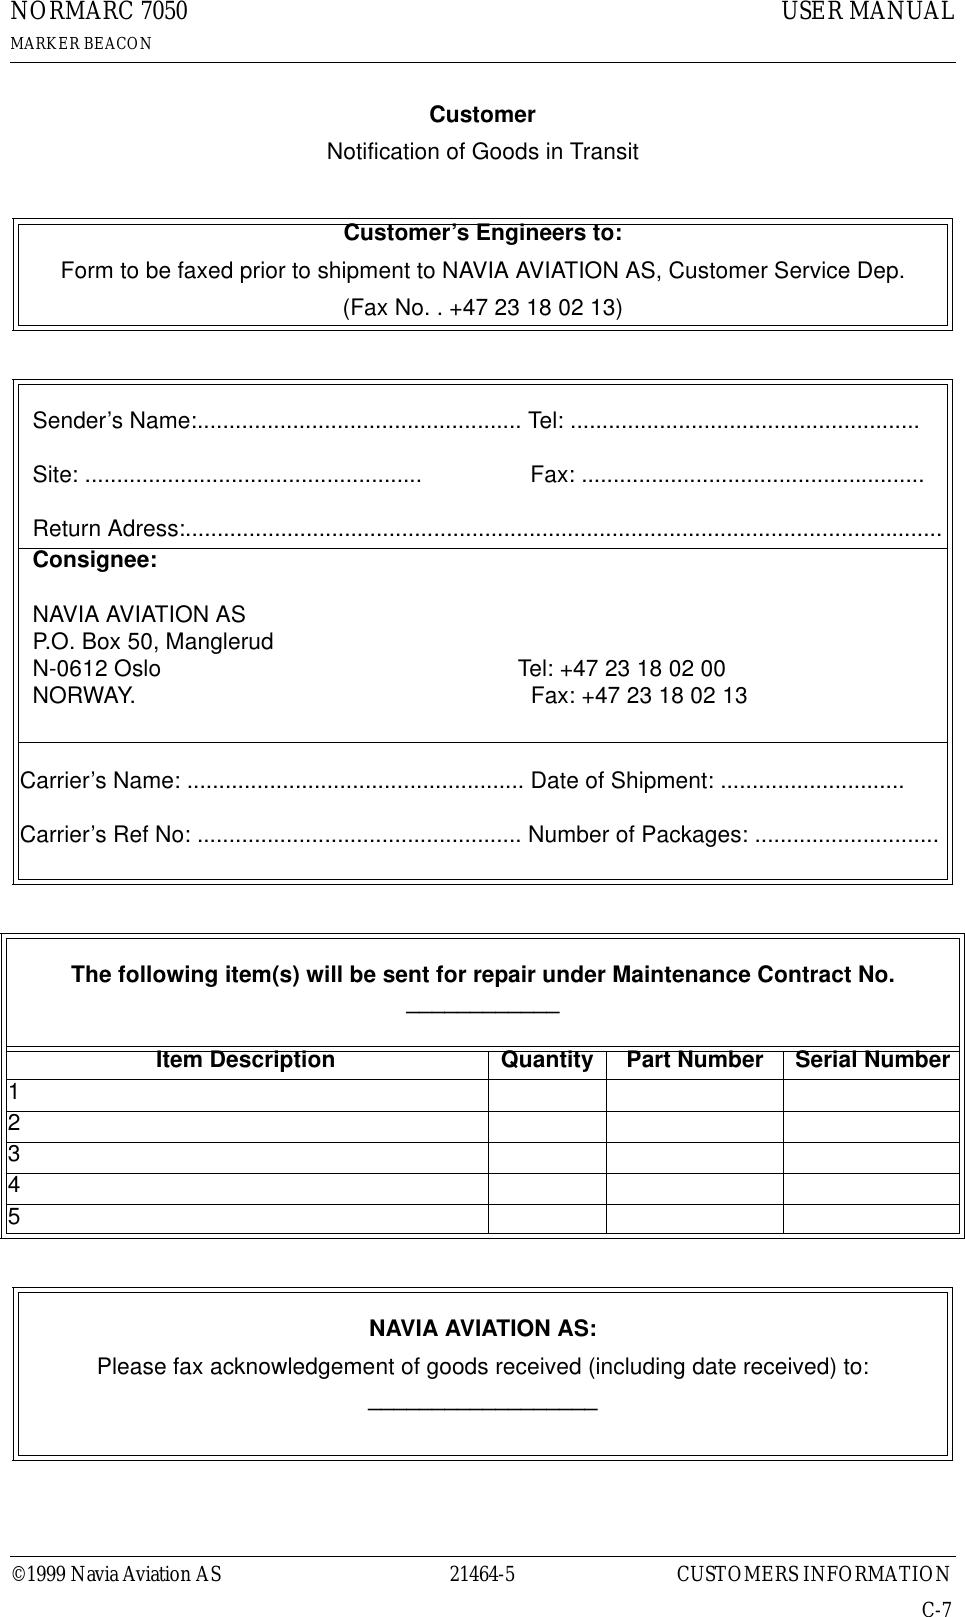 ©1999 Navia Aviation AS 21464-5 CUSTOMERS INFORMATIONUSER MANUALNORMARC 7050MARKER BEACONC-7CustomerNotification of Goods in TransitCustomer’s Engineers to:Form to be faxed prior to shipment to NAVIA AVIATION AS, Customer Service Dep.(Fax No. . +47 23 18 02 13)   Sender’s Name:................................................... Tel: .......................................................  Site: .....................................................                 Fax: ......................................................  Return Adress:.......................................................................................................................  Consignee:  NAVIA AVIATION AS  P.O. Box 50, Manglerud  N-0612 Oslo                                                        Tel: +47 23 18 02 00  NORWAY.                                                              Fax: +47 23 18 02 13Carrier’s Name: ..................................................... Date of Shipment: .............................Carrier’s Ref No: ................................................... Number of Packages: .............................The following item(s) will be sent for repair under Maintenance Contract No.  ____________Item Description Quantity Part Number Serial Number12345NAVIA AVIATION AS:Please fax acknowledgement of goods received (including date received) to:__________________